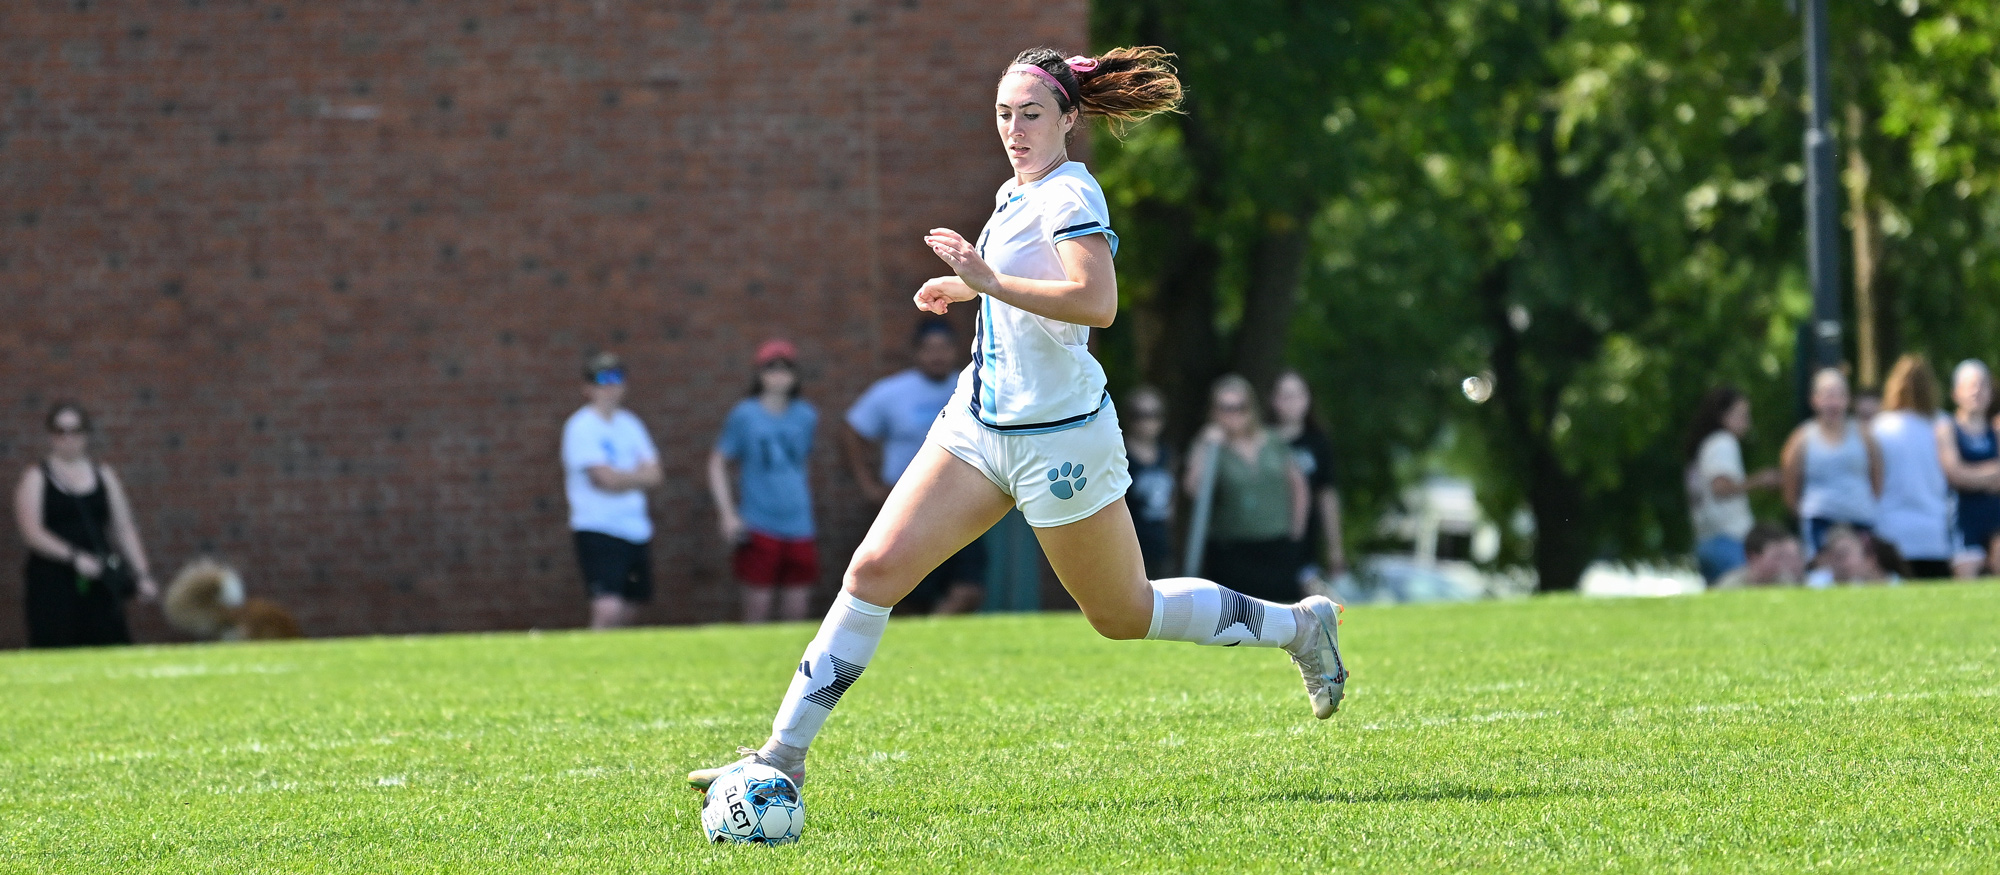 Schuyler Pettibone's first collegiate goal helped Mount Holyoke win 1-0 at Wheaton College on Oct. 14, 2023. (RJB Sports file photo)